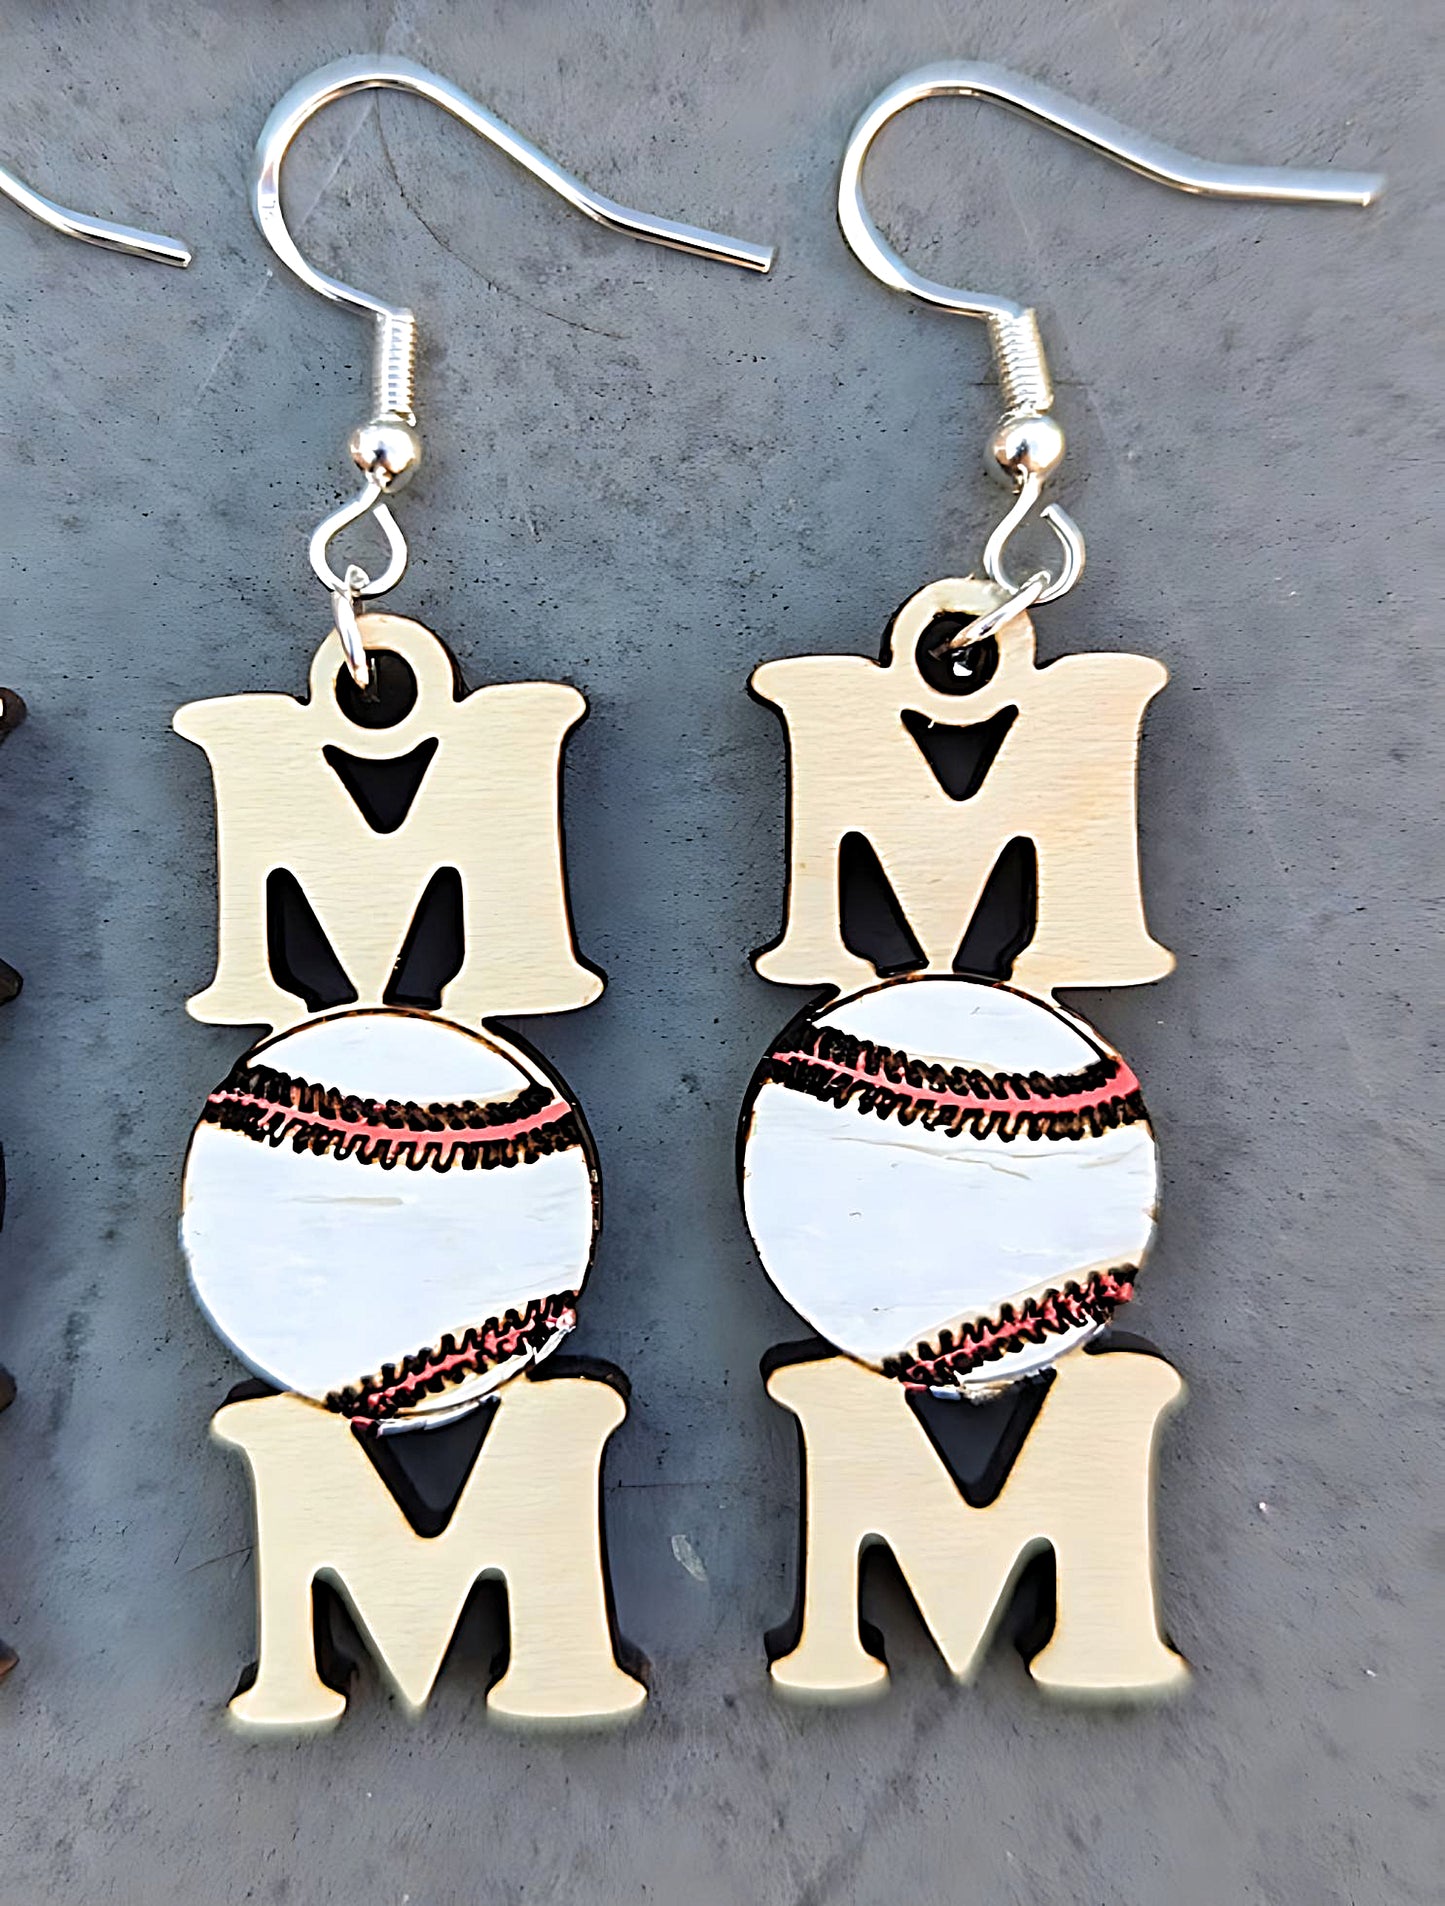 Sports earrings svg, Mom earrings DIGITAL FILE, SVG laser cut file, Mother's day gift svg, Sports ball svg, Cut and score Glowforge file